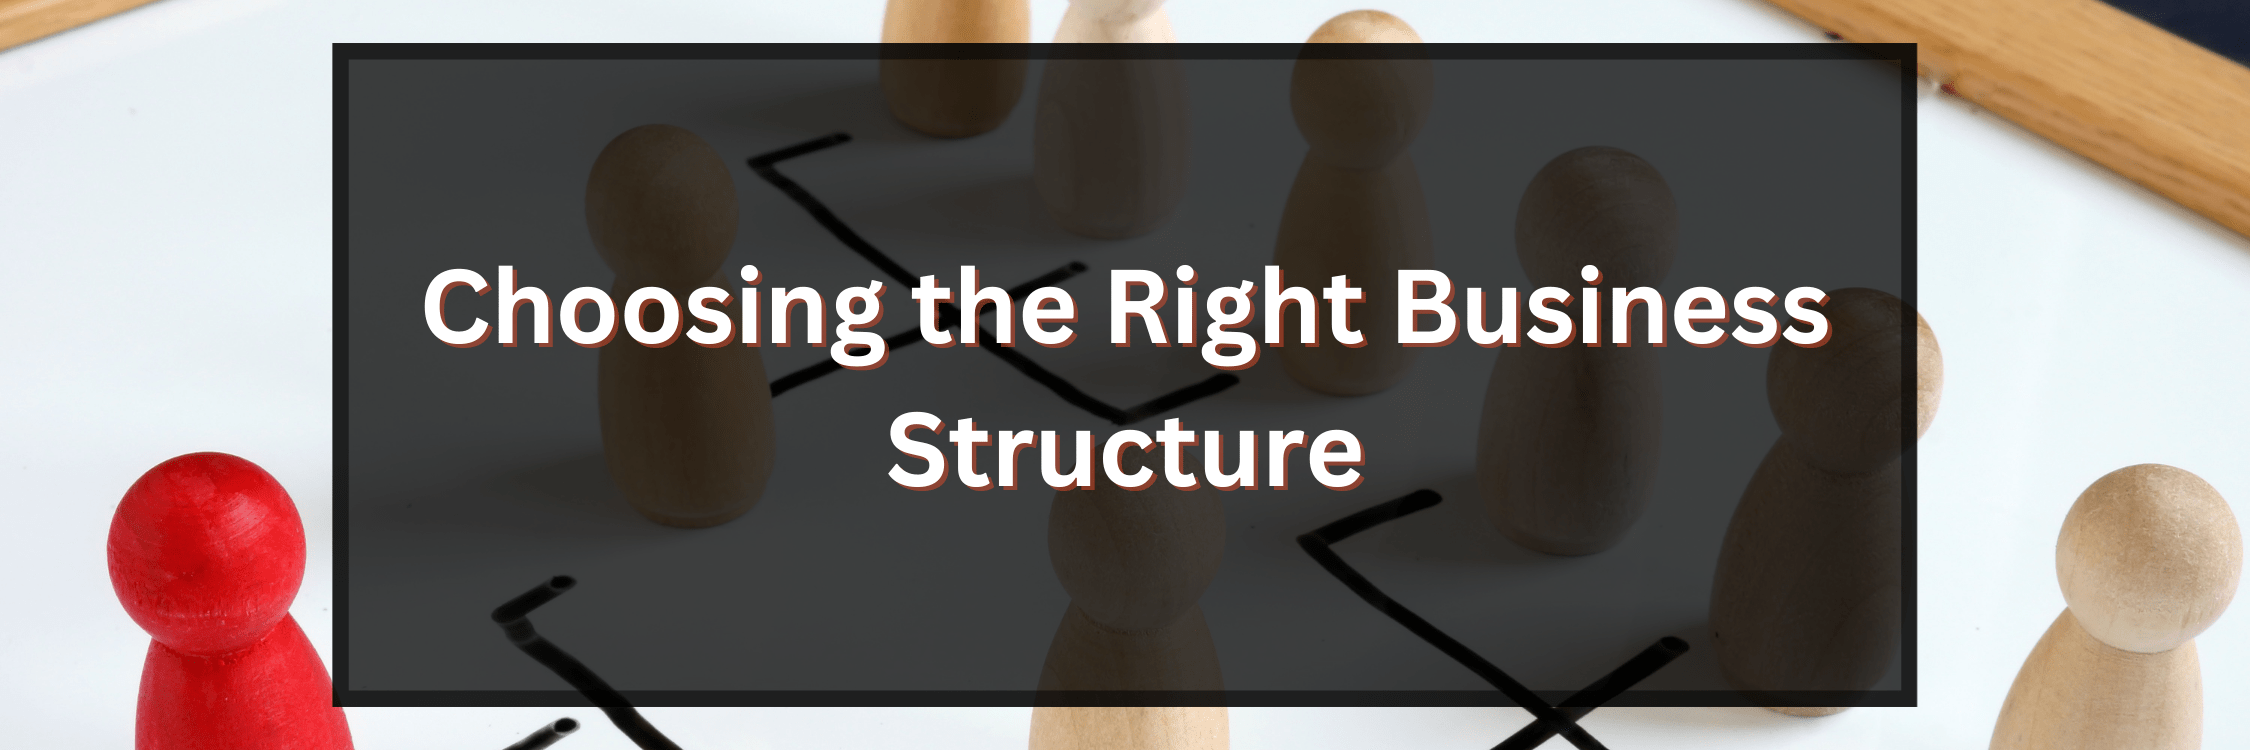 Choosing The Right Business Structure